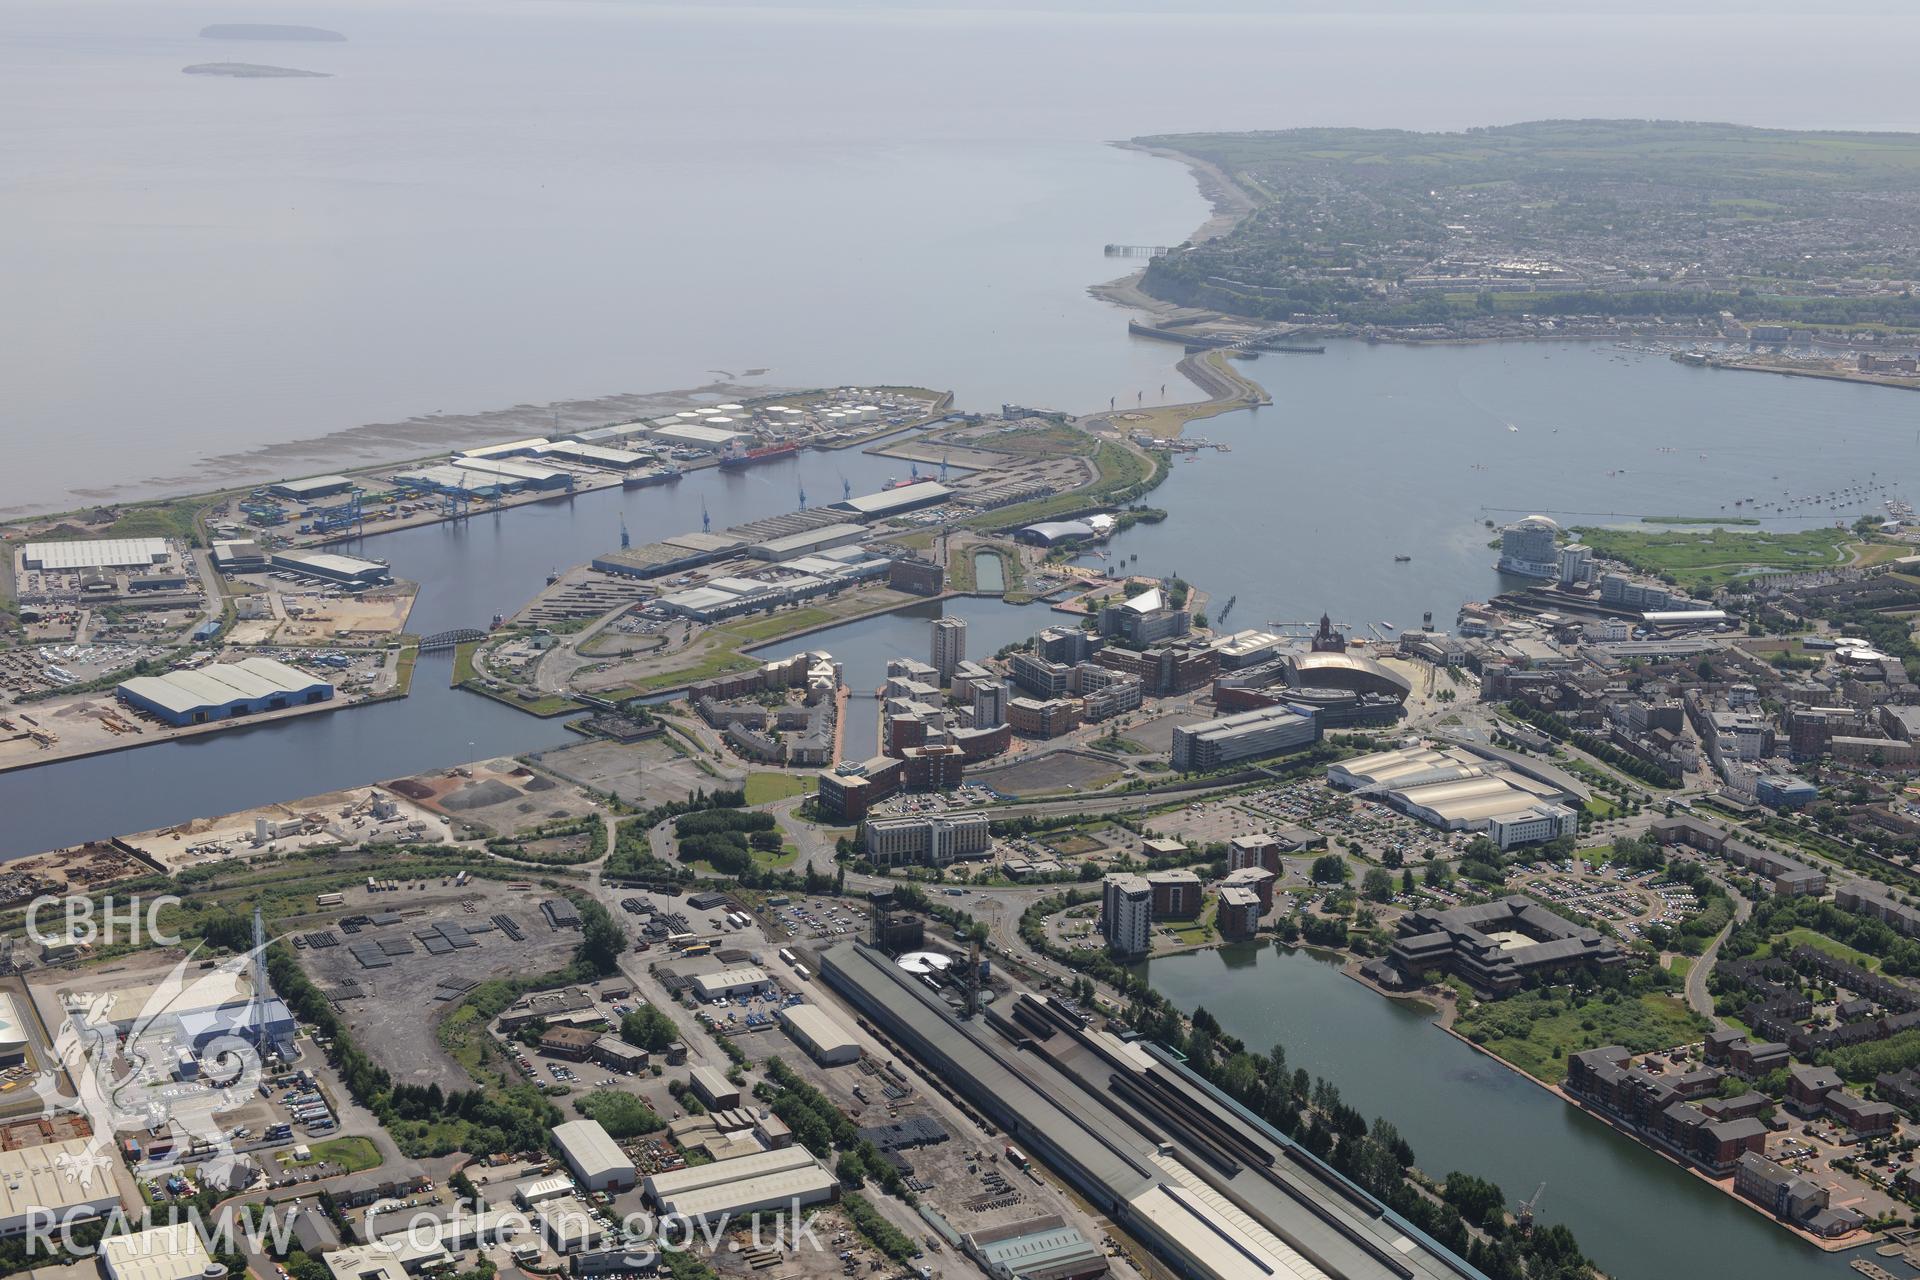 Red Dragon Centre; South Glamorgan County Hall & Bute East, Queen Alexandra & Roath Docks, Cardiff Bay. Oblique aerial photograph taken during Royal Commission's programme of archaeological aerial reconnaissance by Toby Driver on 29/06/2015.